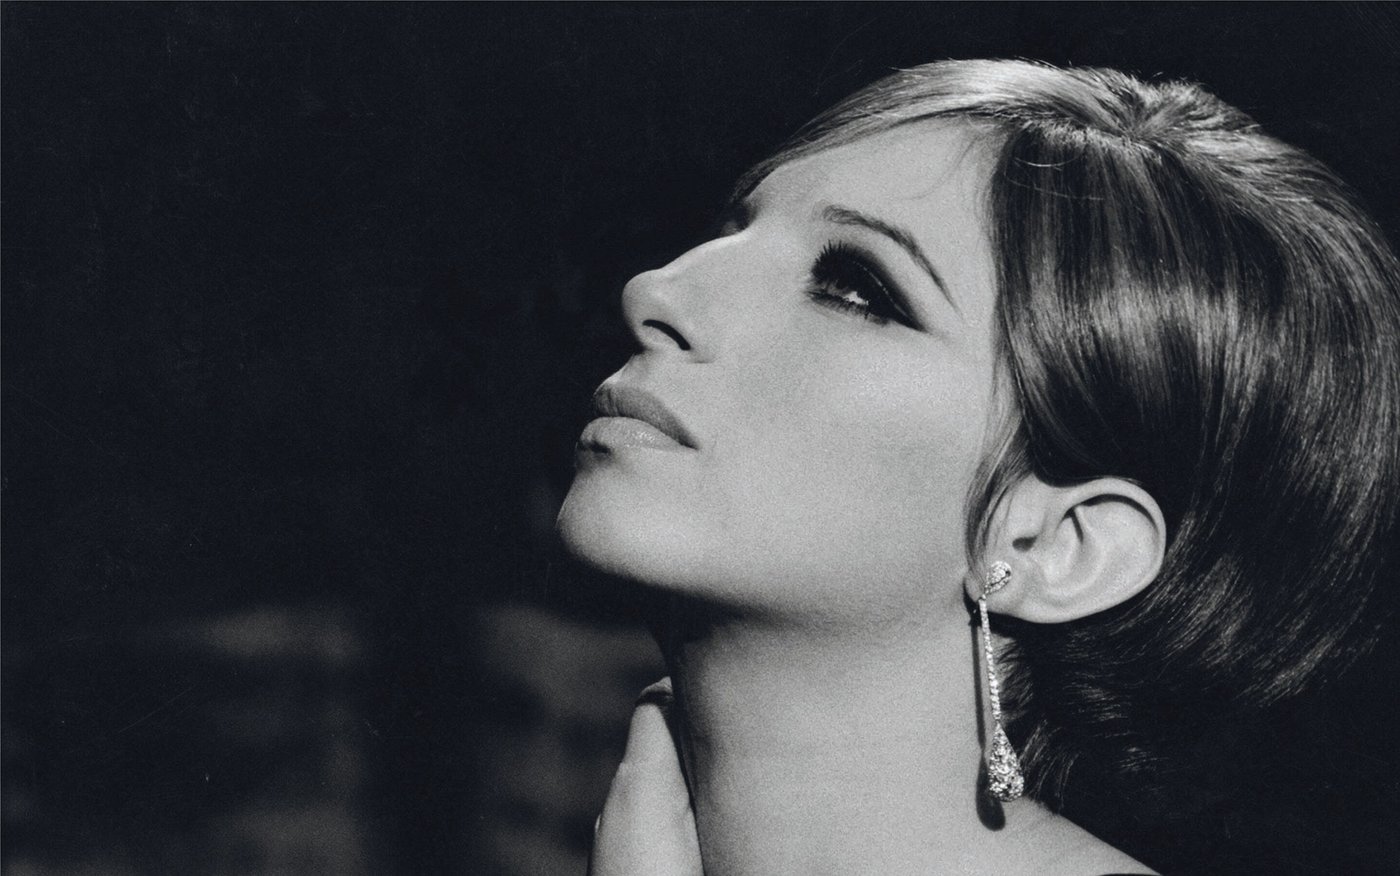 A Barbra Streisand photo from Hello Gorgeous at the Jewish Museum-FIU BARBRA STREISAND PHOTO COURTESY OF JEWISH MUSEUM-FIU